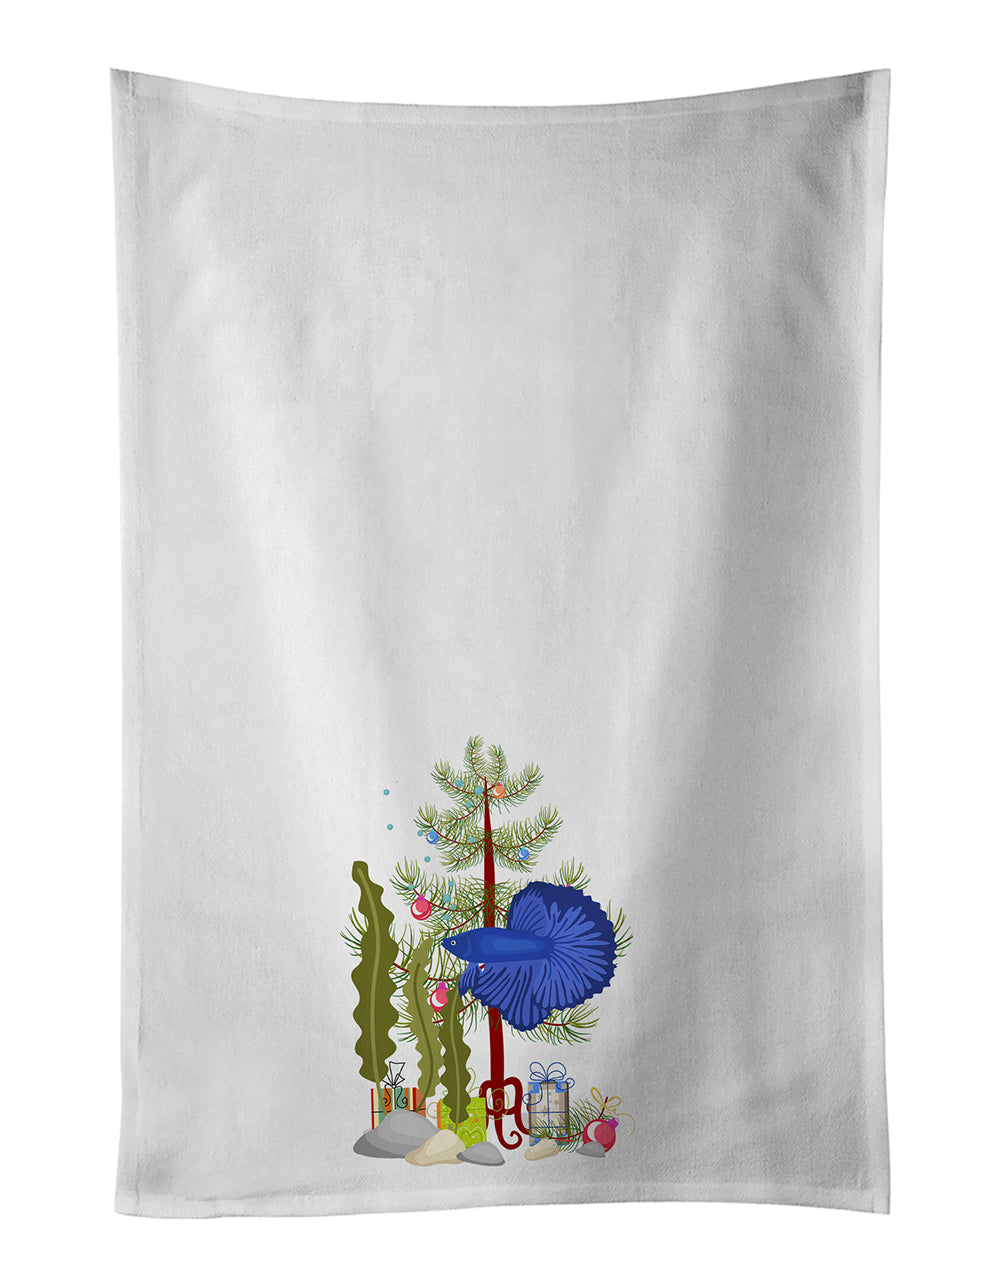 Buy this Super Delta Tail Betta Merry Christmas White Kitchen Towel Set of 2